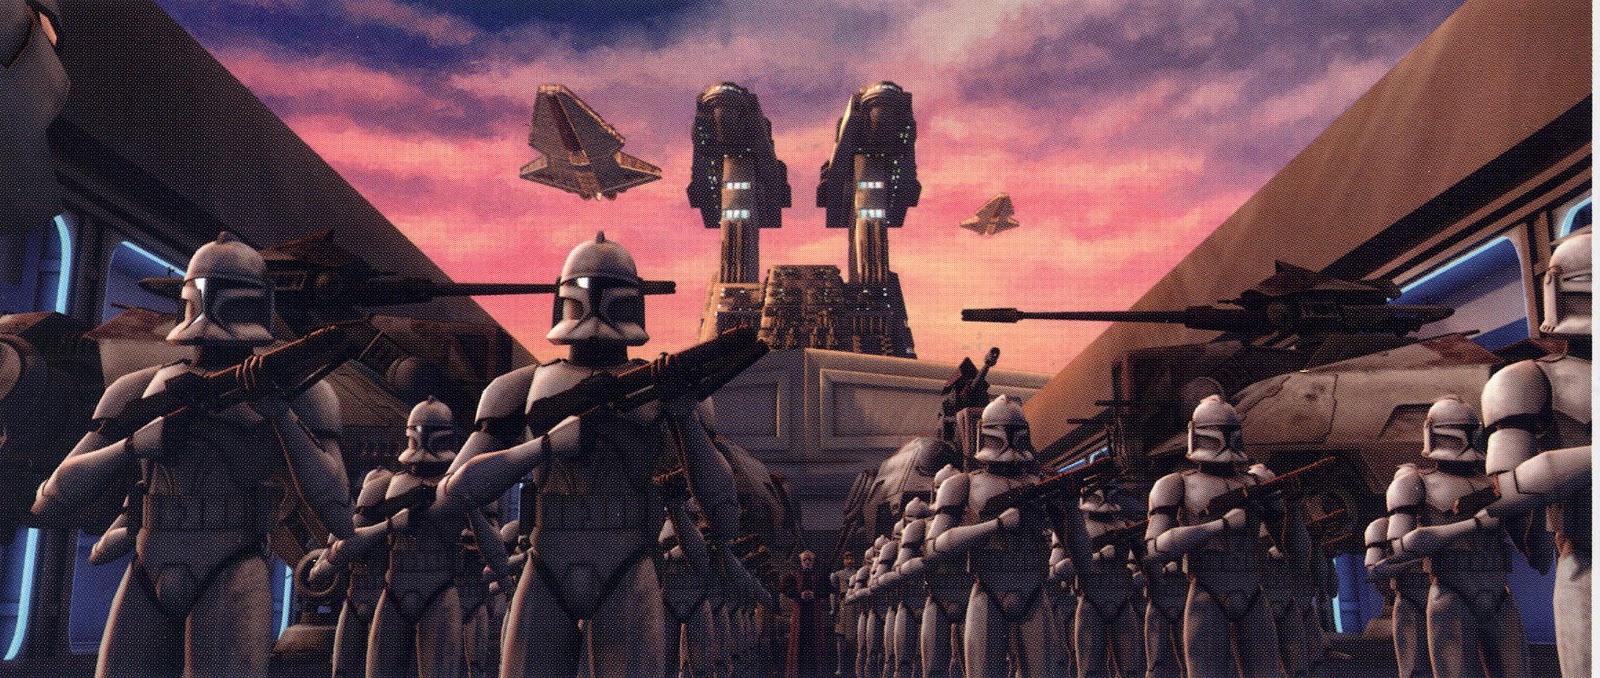 army of clones